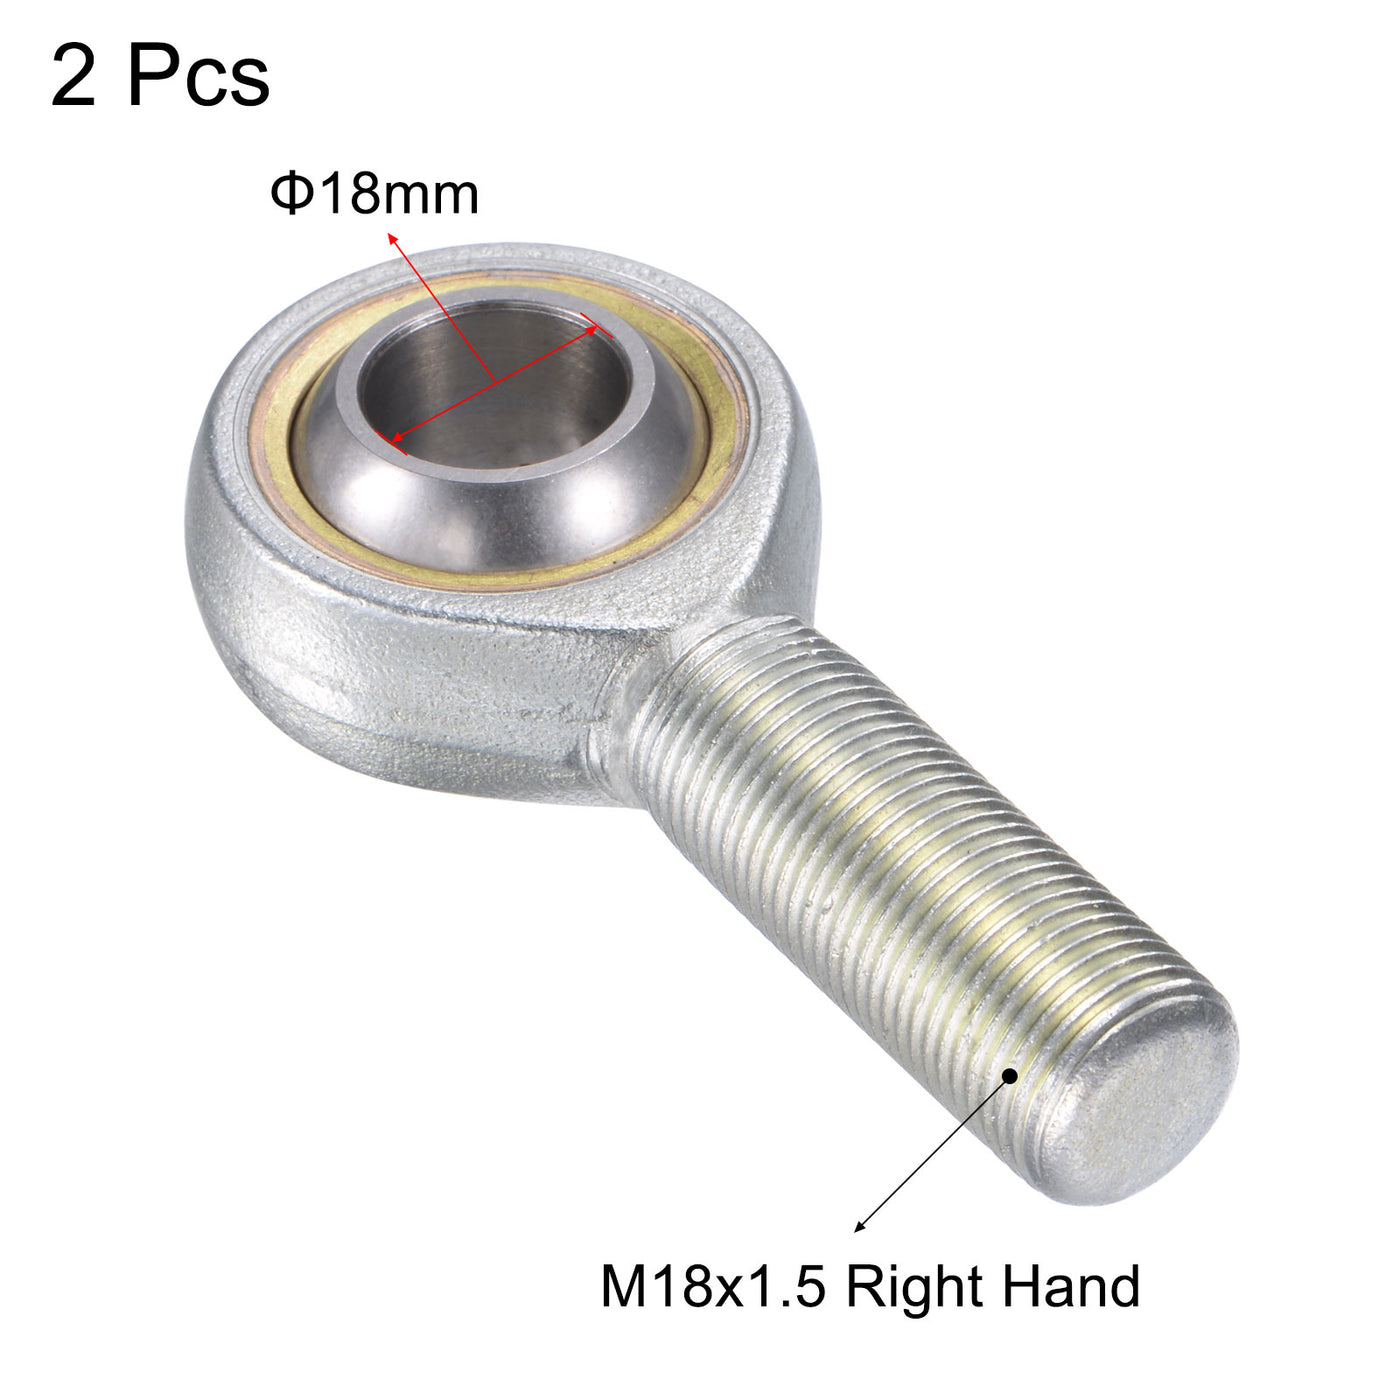 uxcell Uxcell 2pcs SA18TK POSA18 Rod End Bearing 18mm Bore M18x1.5 Right Hand Male Thread